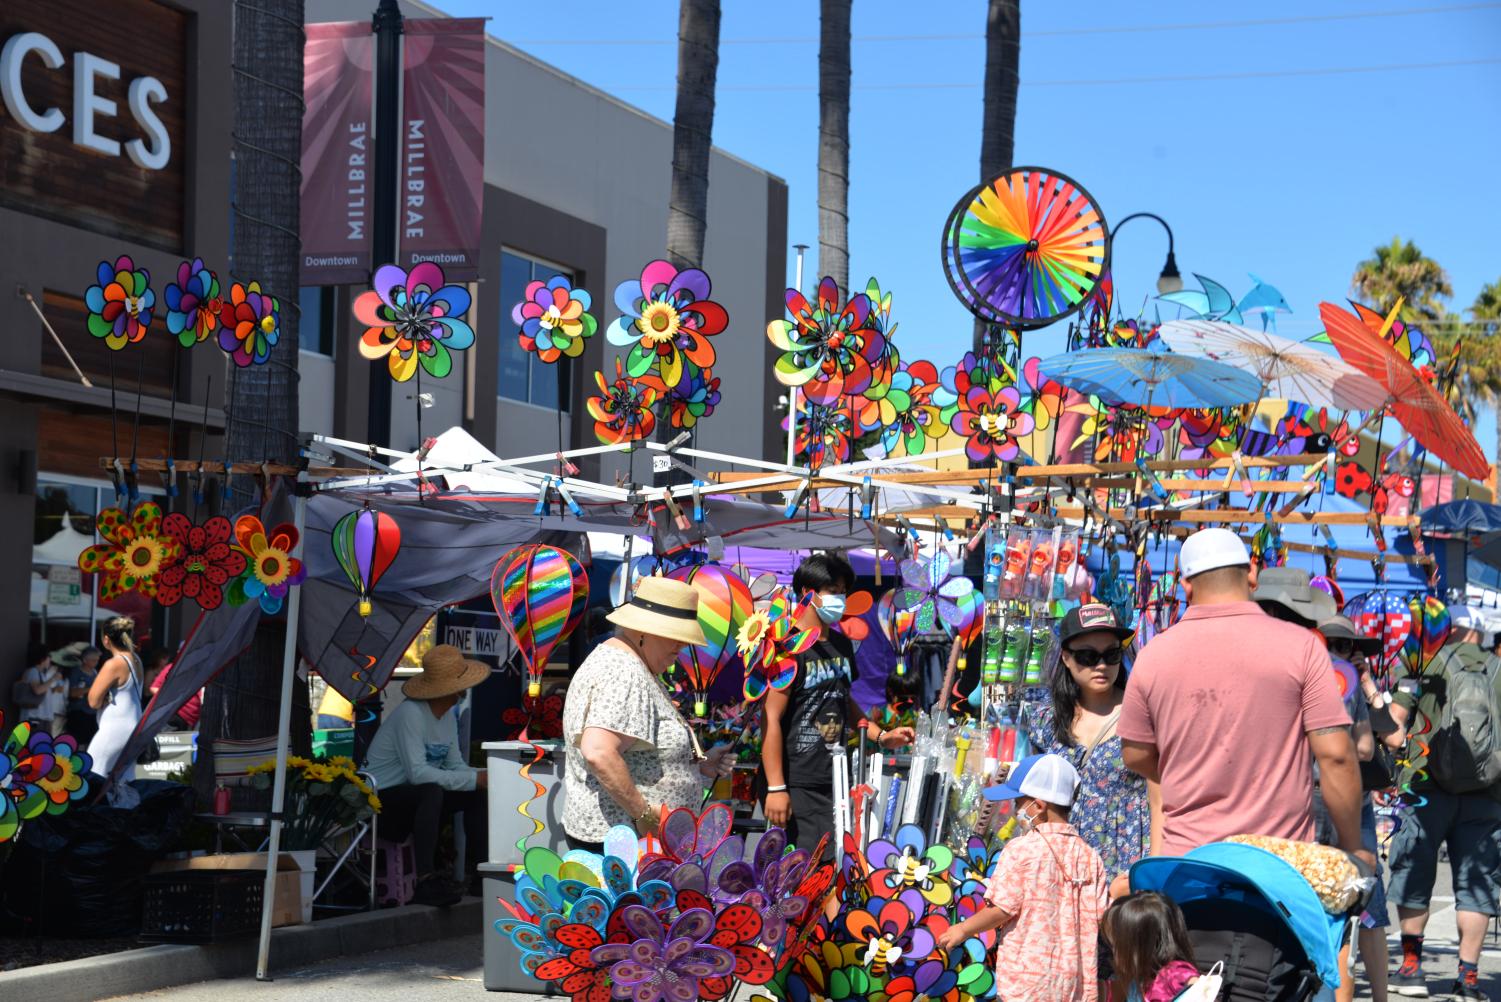 A sunny weekend draws a diverse crowd to Millbrae’s annual Art & Wine